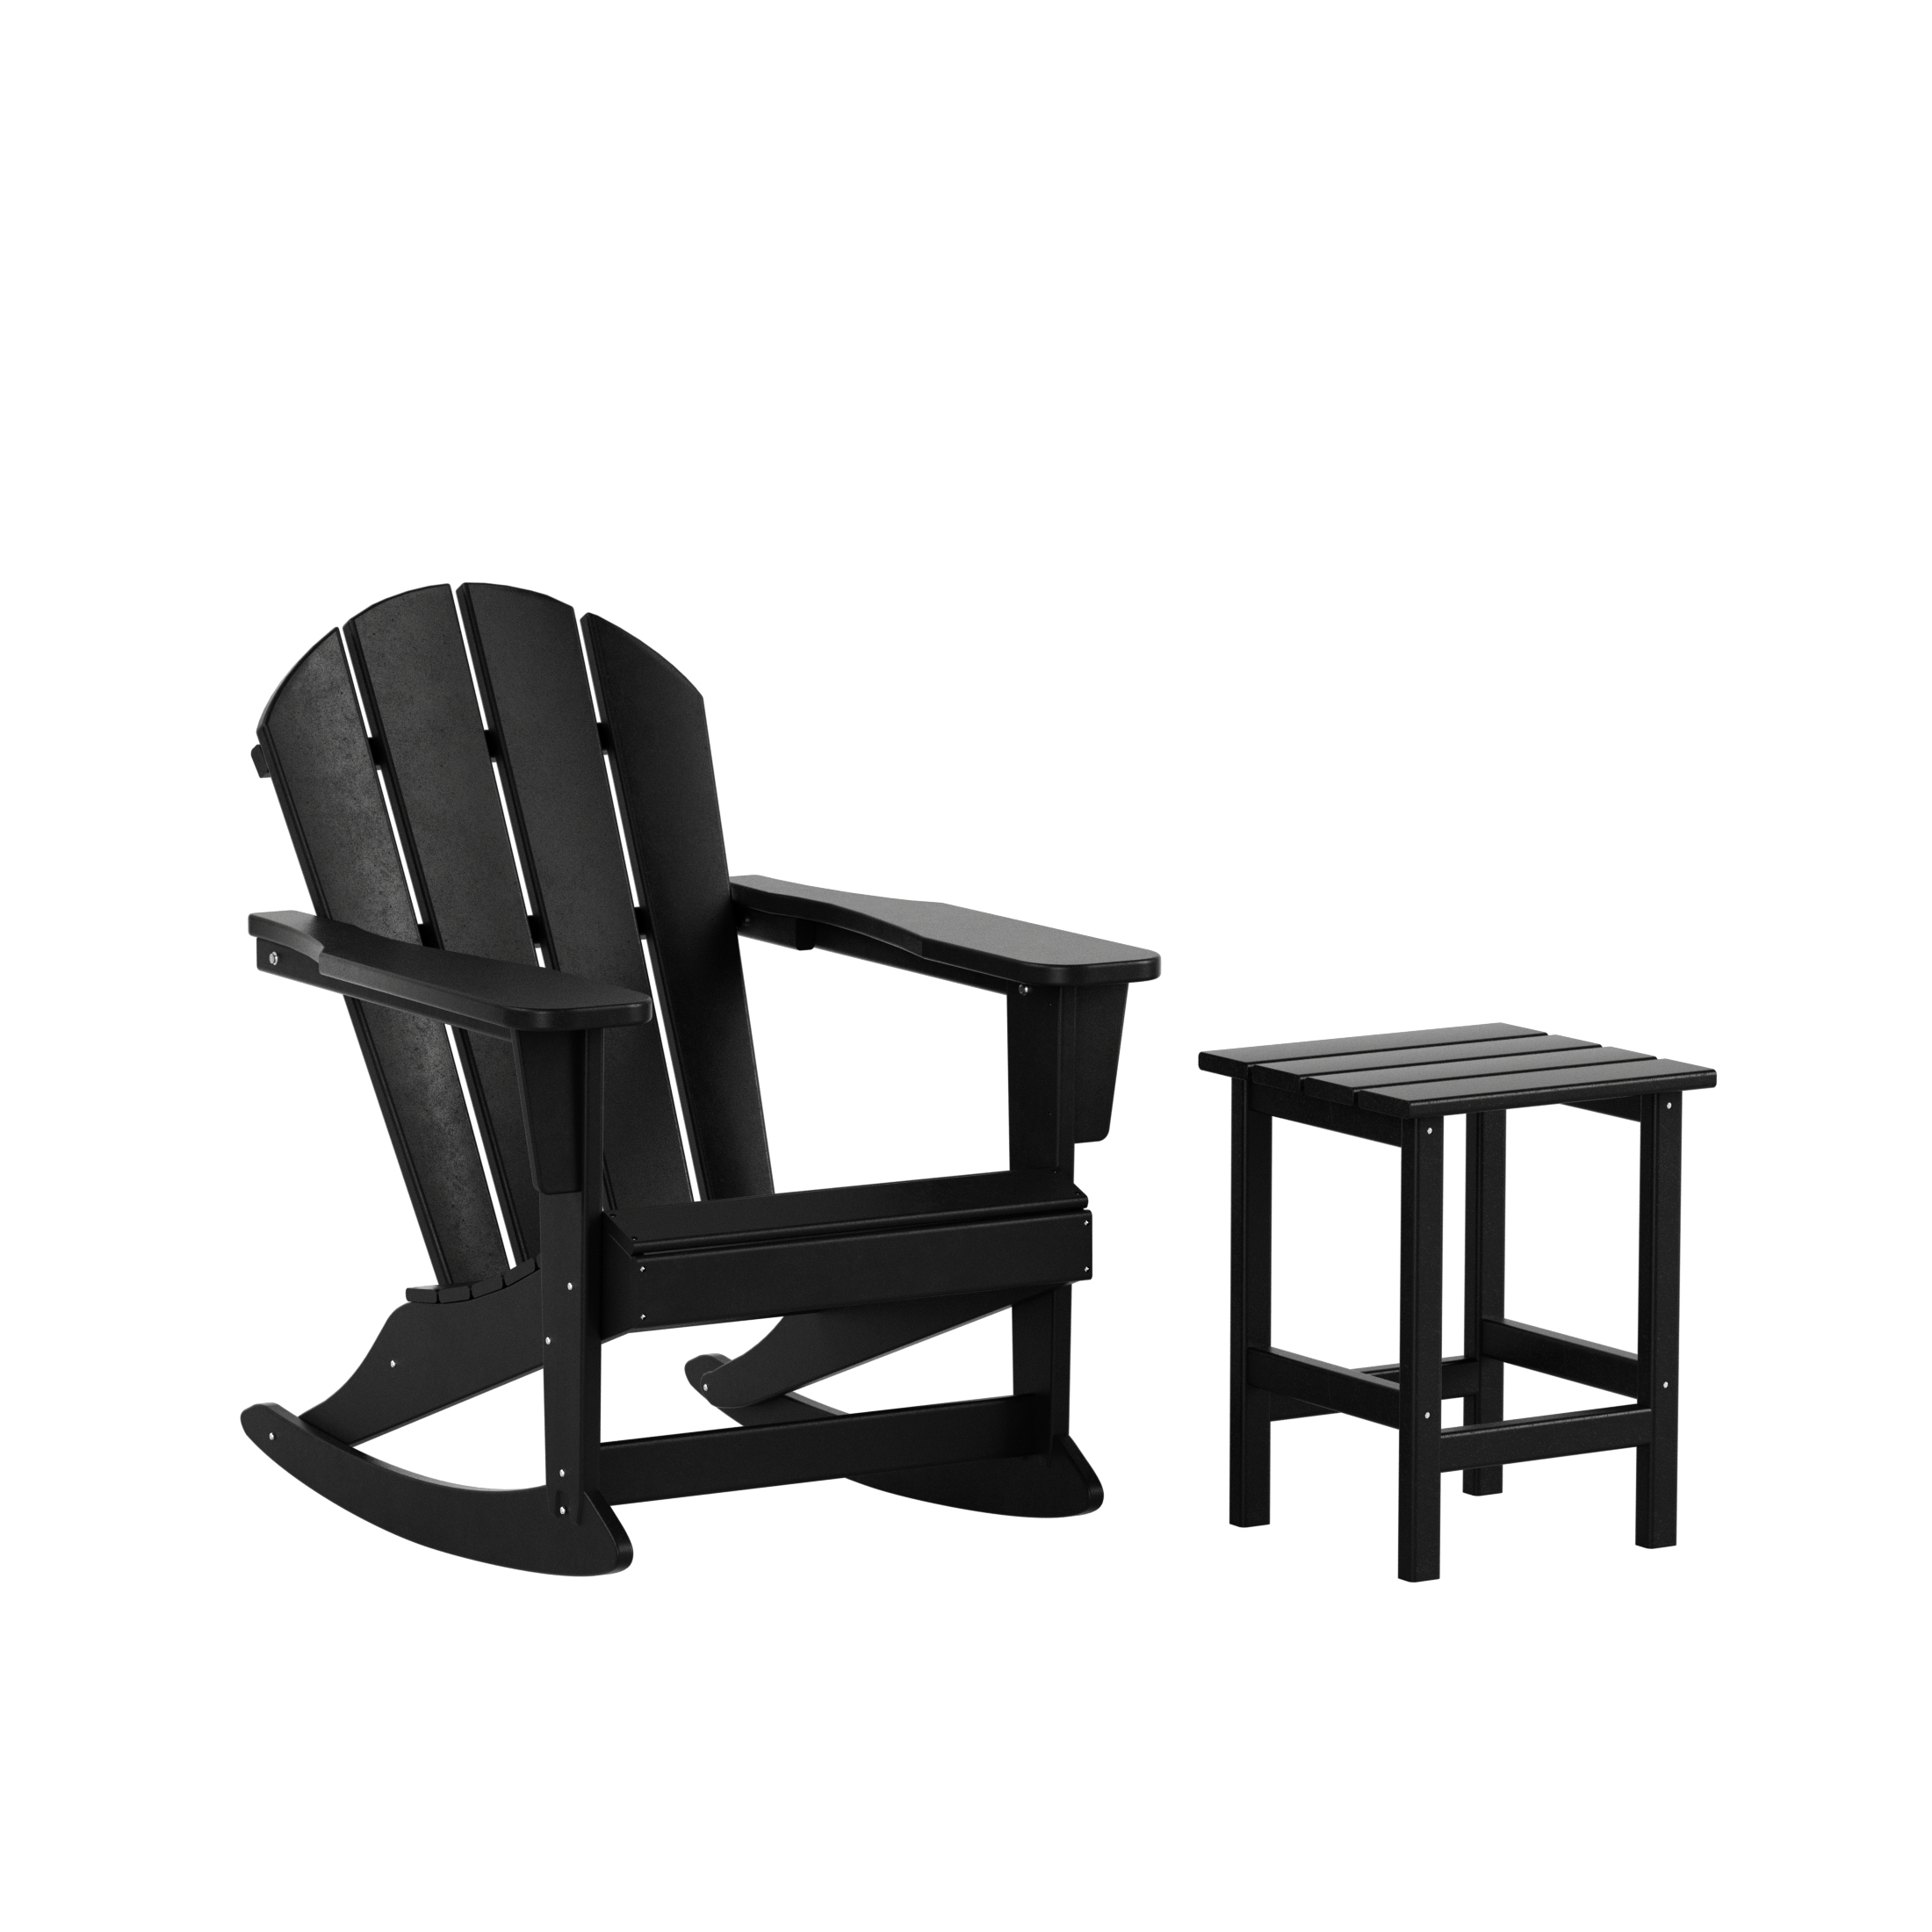 WestinTrends Malibu 2 Piece Outdoor Rocking Chair Set, All Weather Poly Lumber Porch Patio Adirondack Rocking Chair with Side Table, Black - image 1 of 8